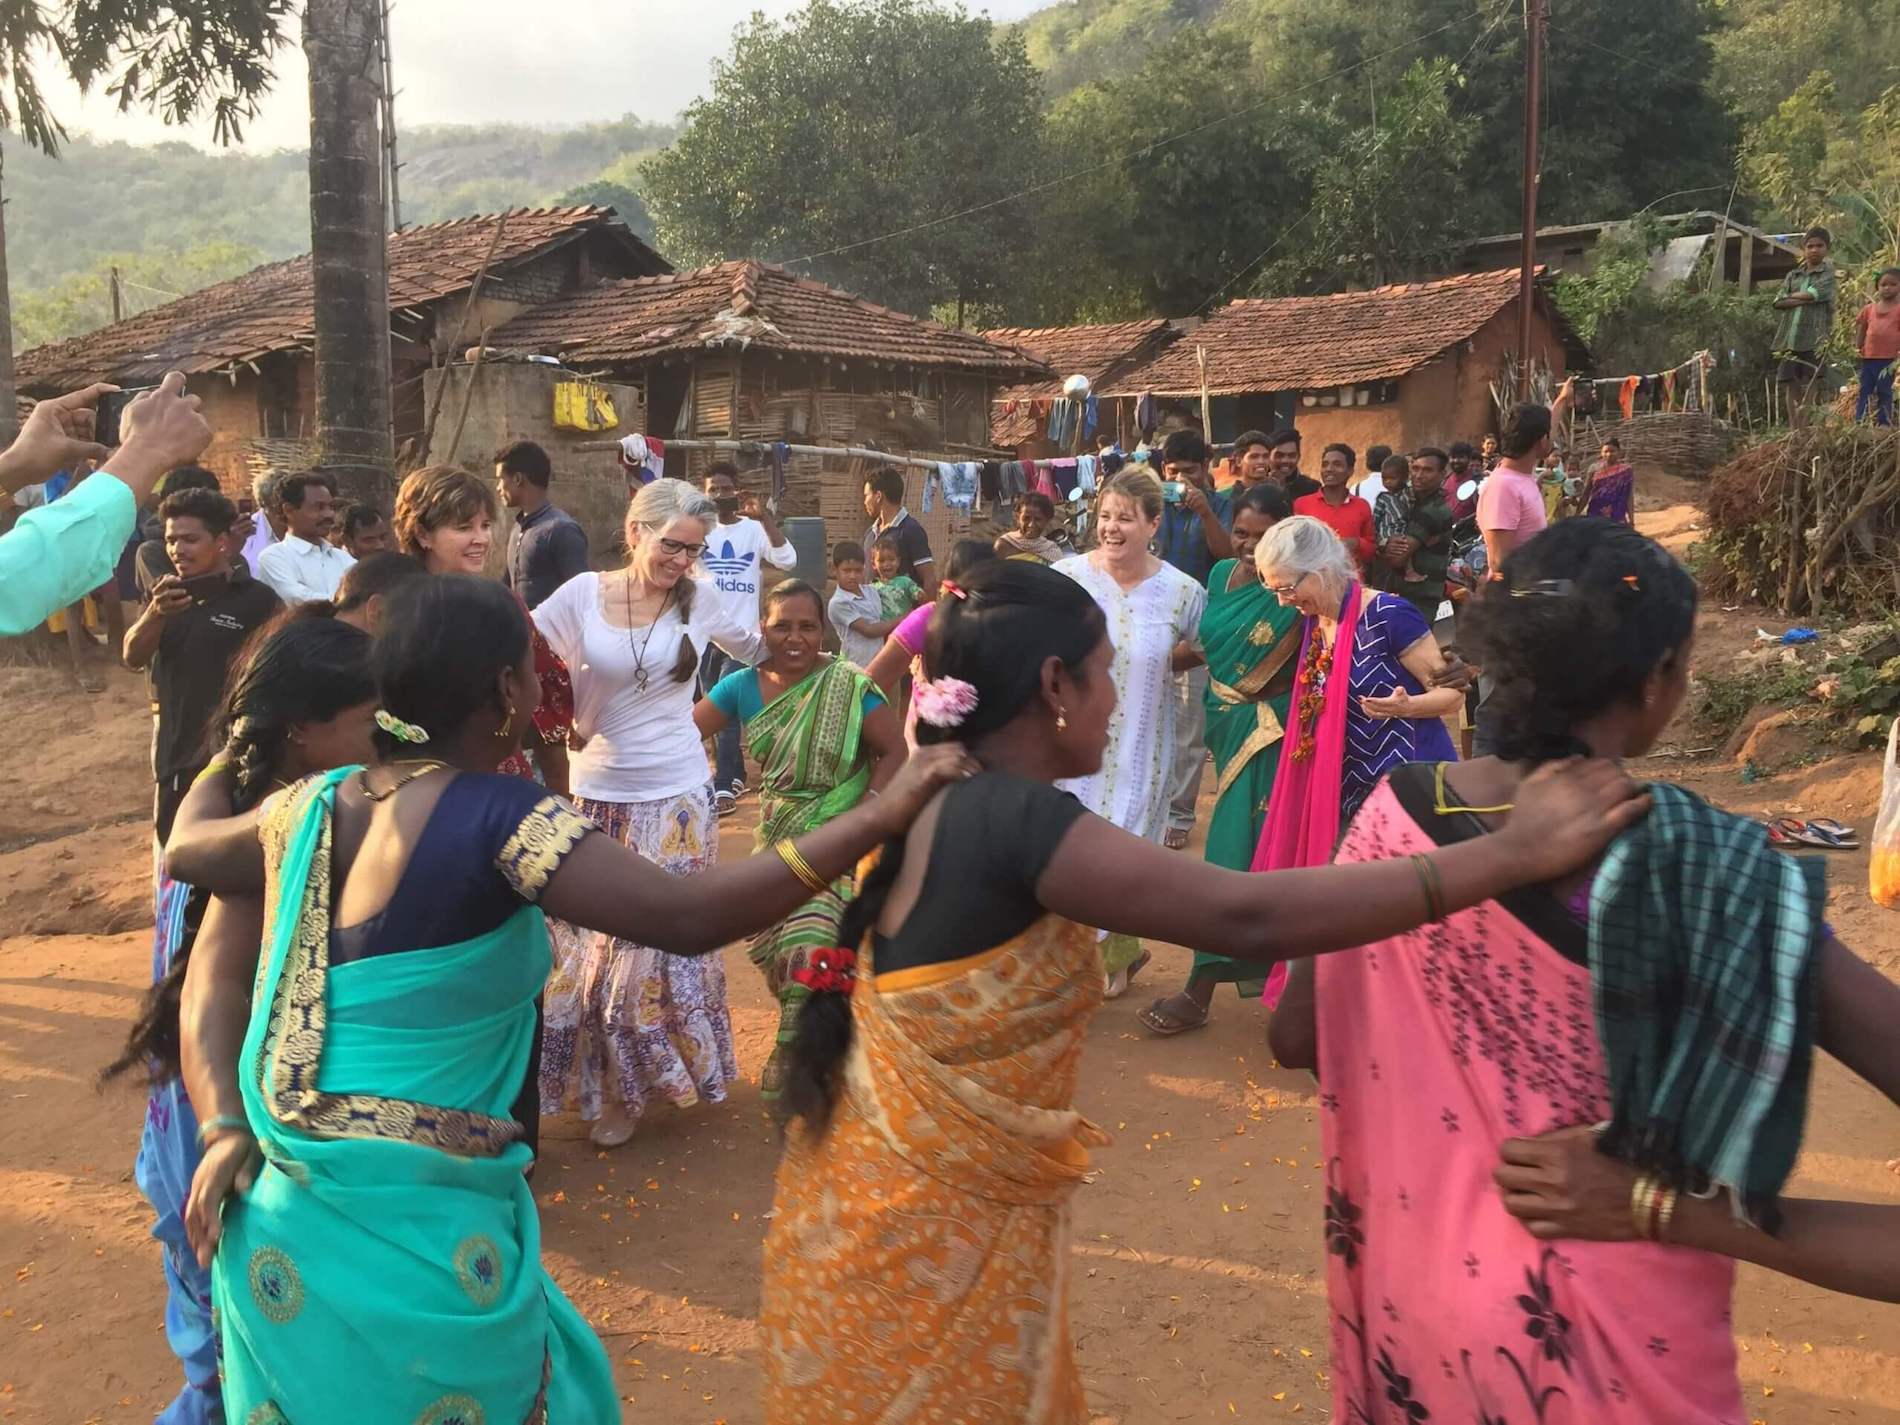 People dancing at a dedication event in India.